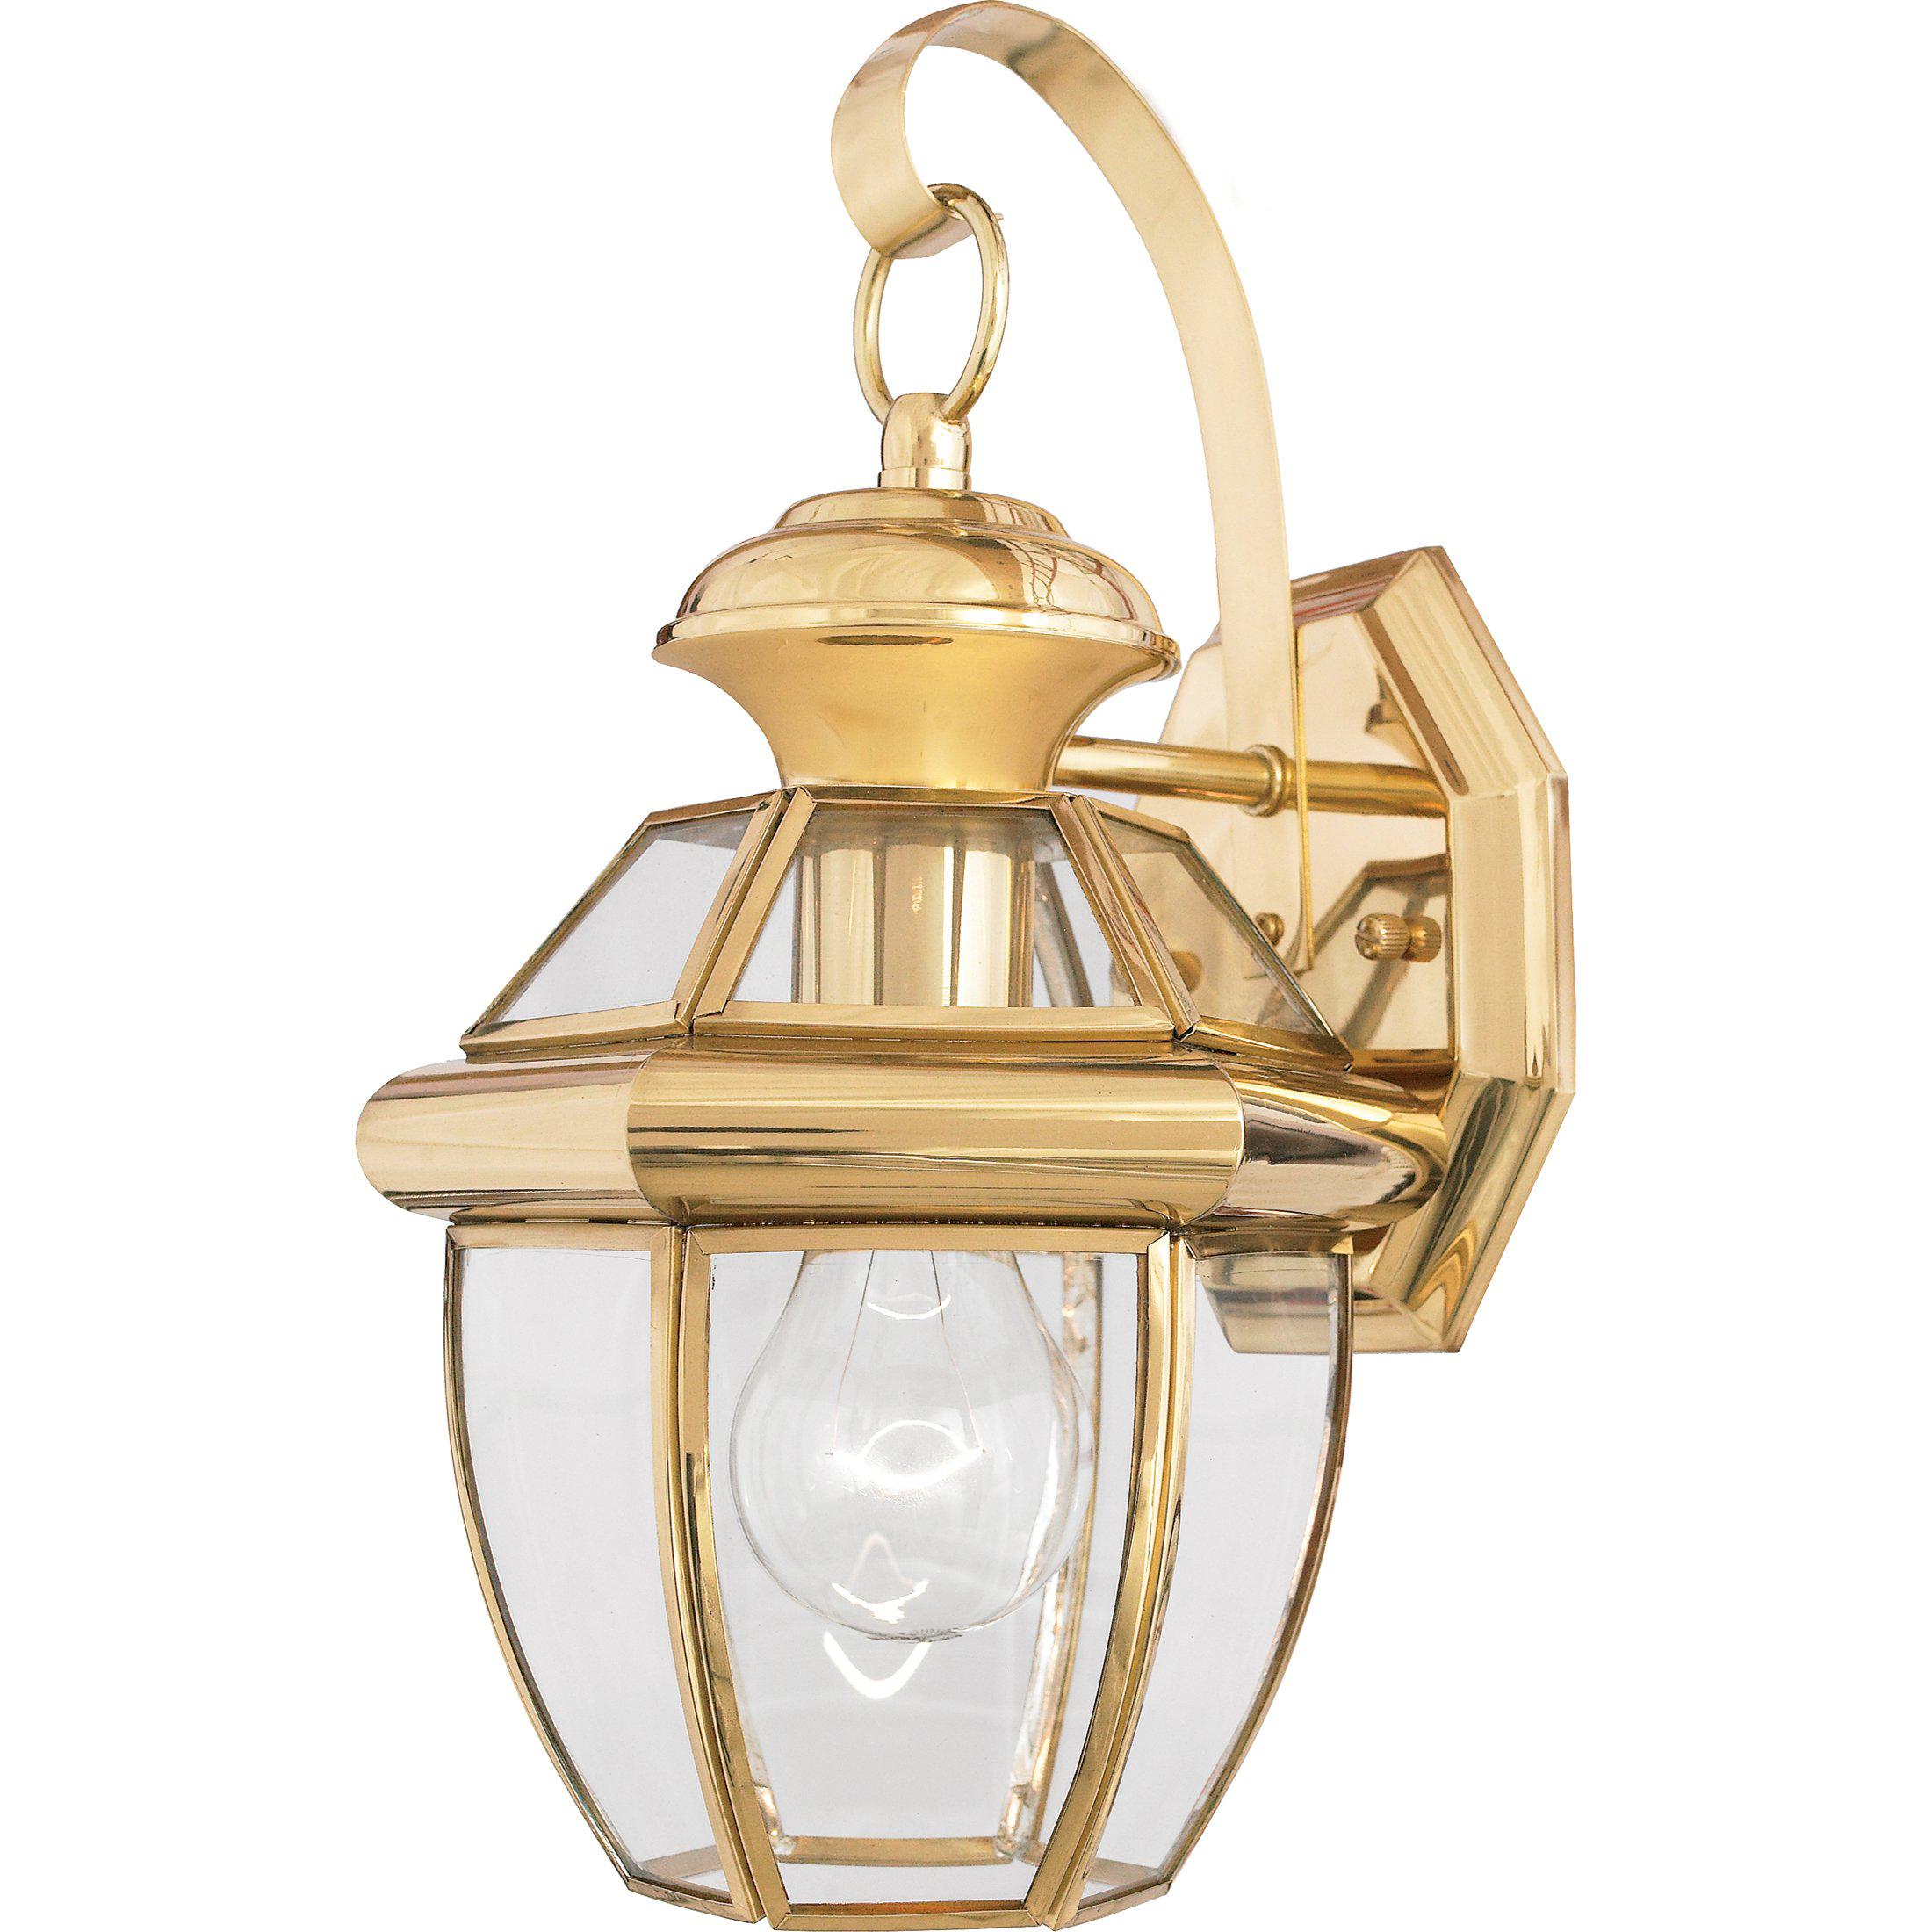 Quoizel  Newbury Outdoor Lantern, Small Outdoor l Wall Quoizel Polished Brass  